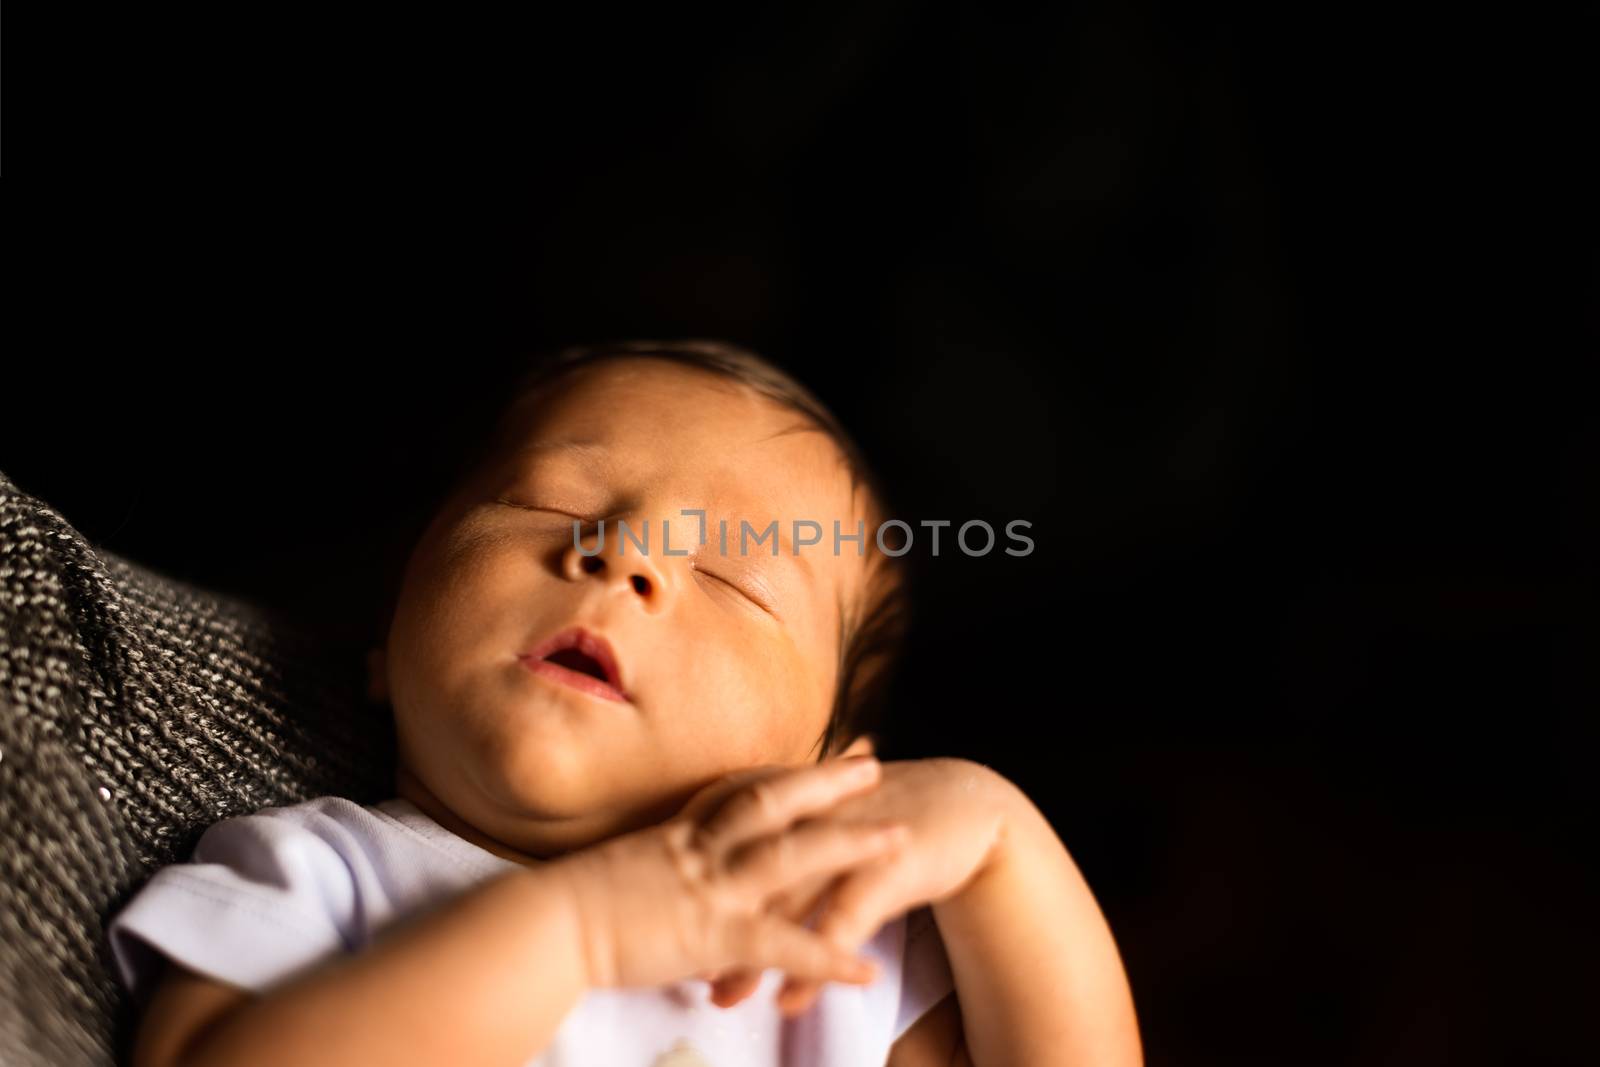 A Newborn Sleeps in his Father's Arms with black background for copyspace.